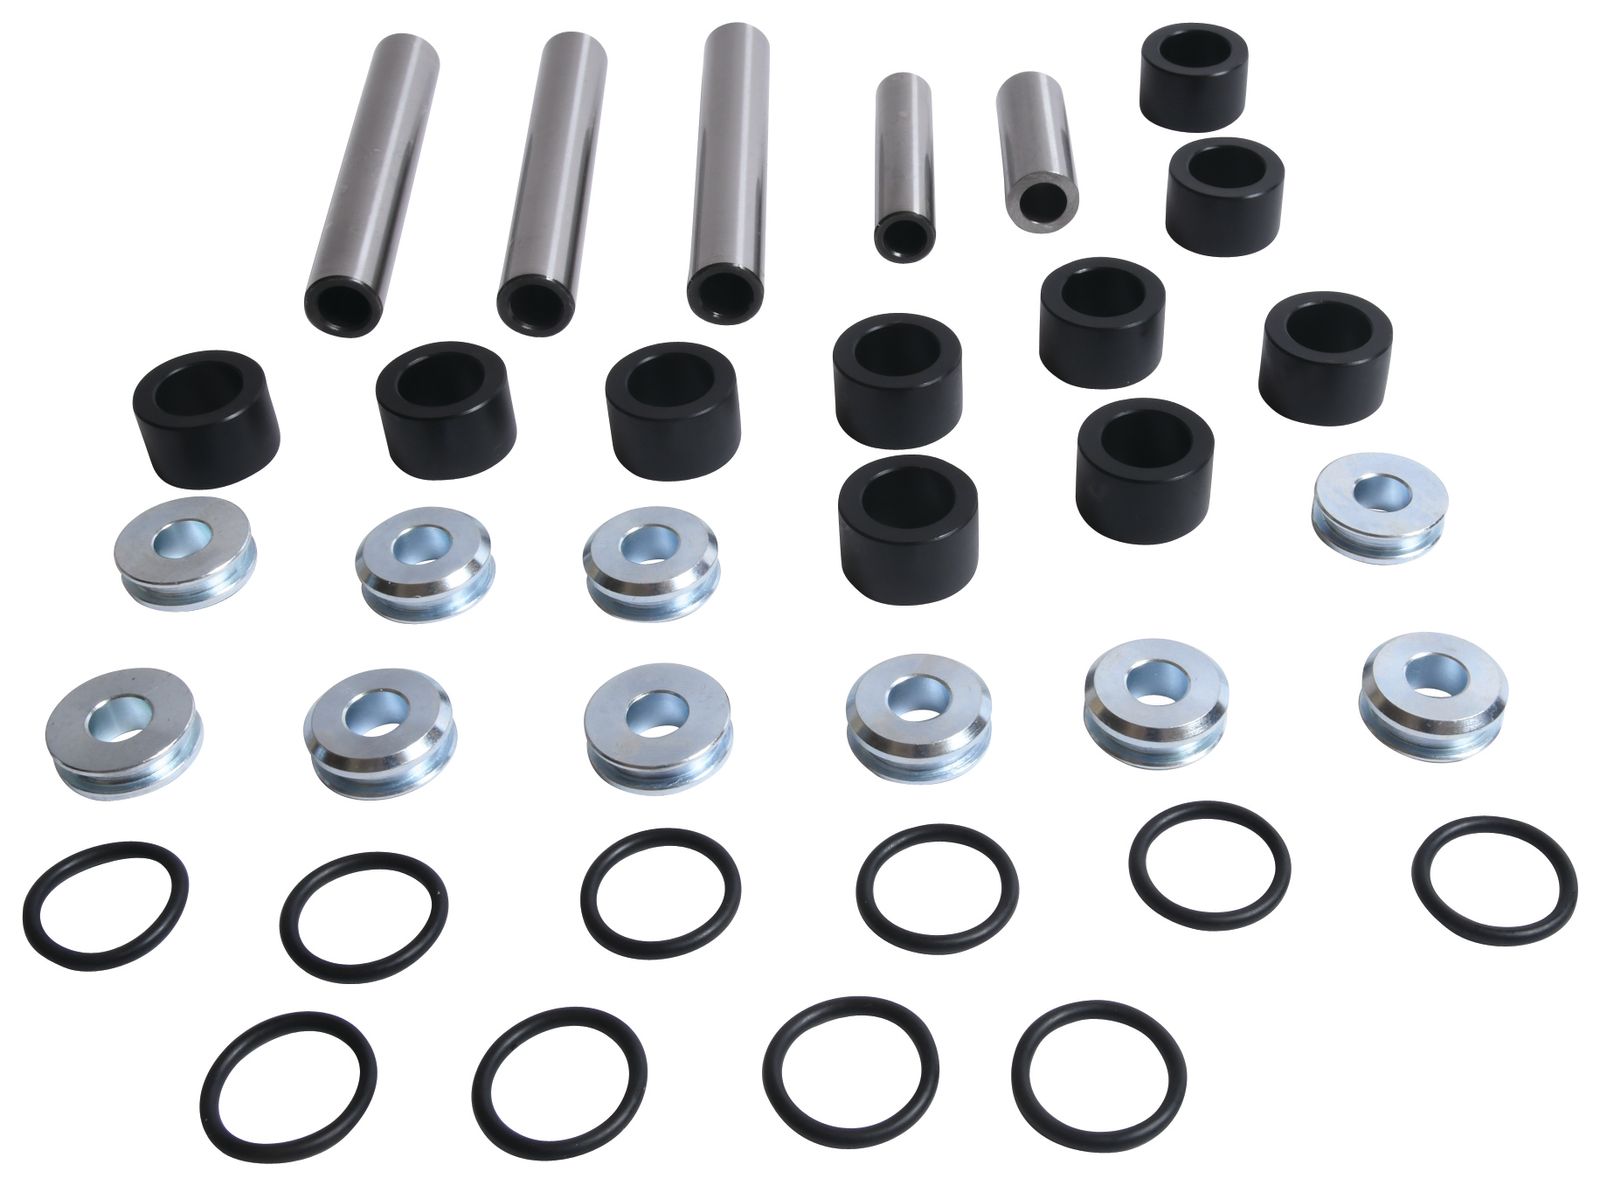 Wrp Rear Ind. Suspension Kits - WRP501242 image